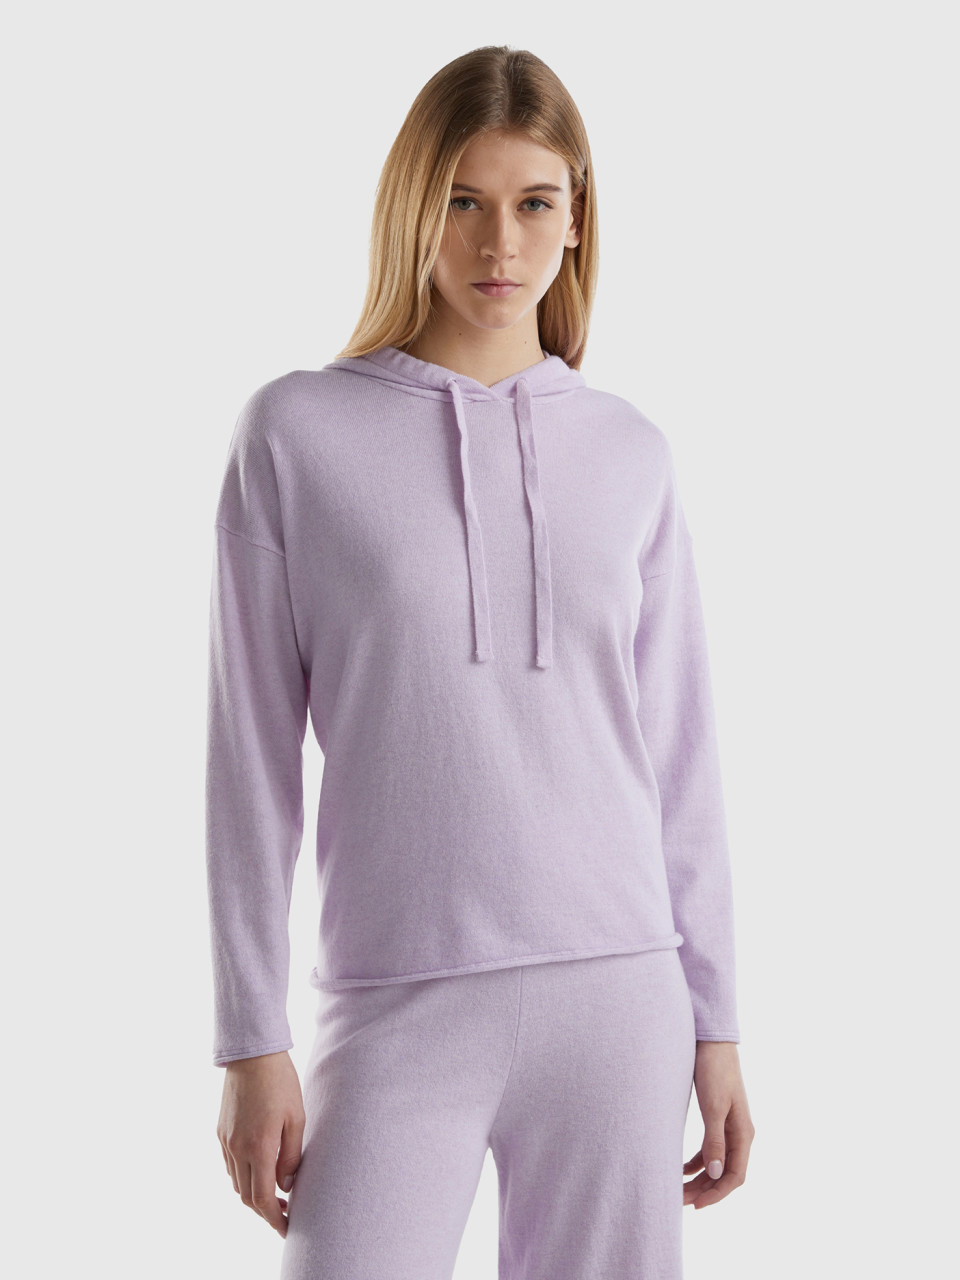 Benetton, Light Lilac Cashmere Blend Sweater With Hood, Lilac, Women